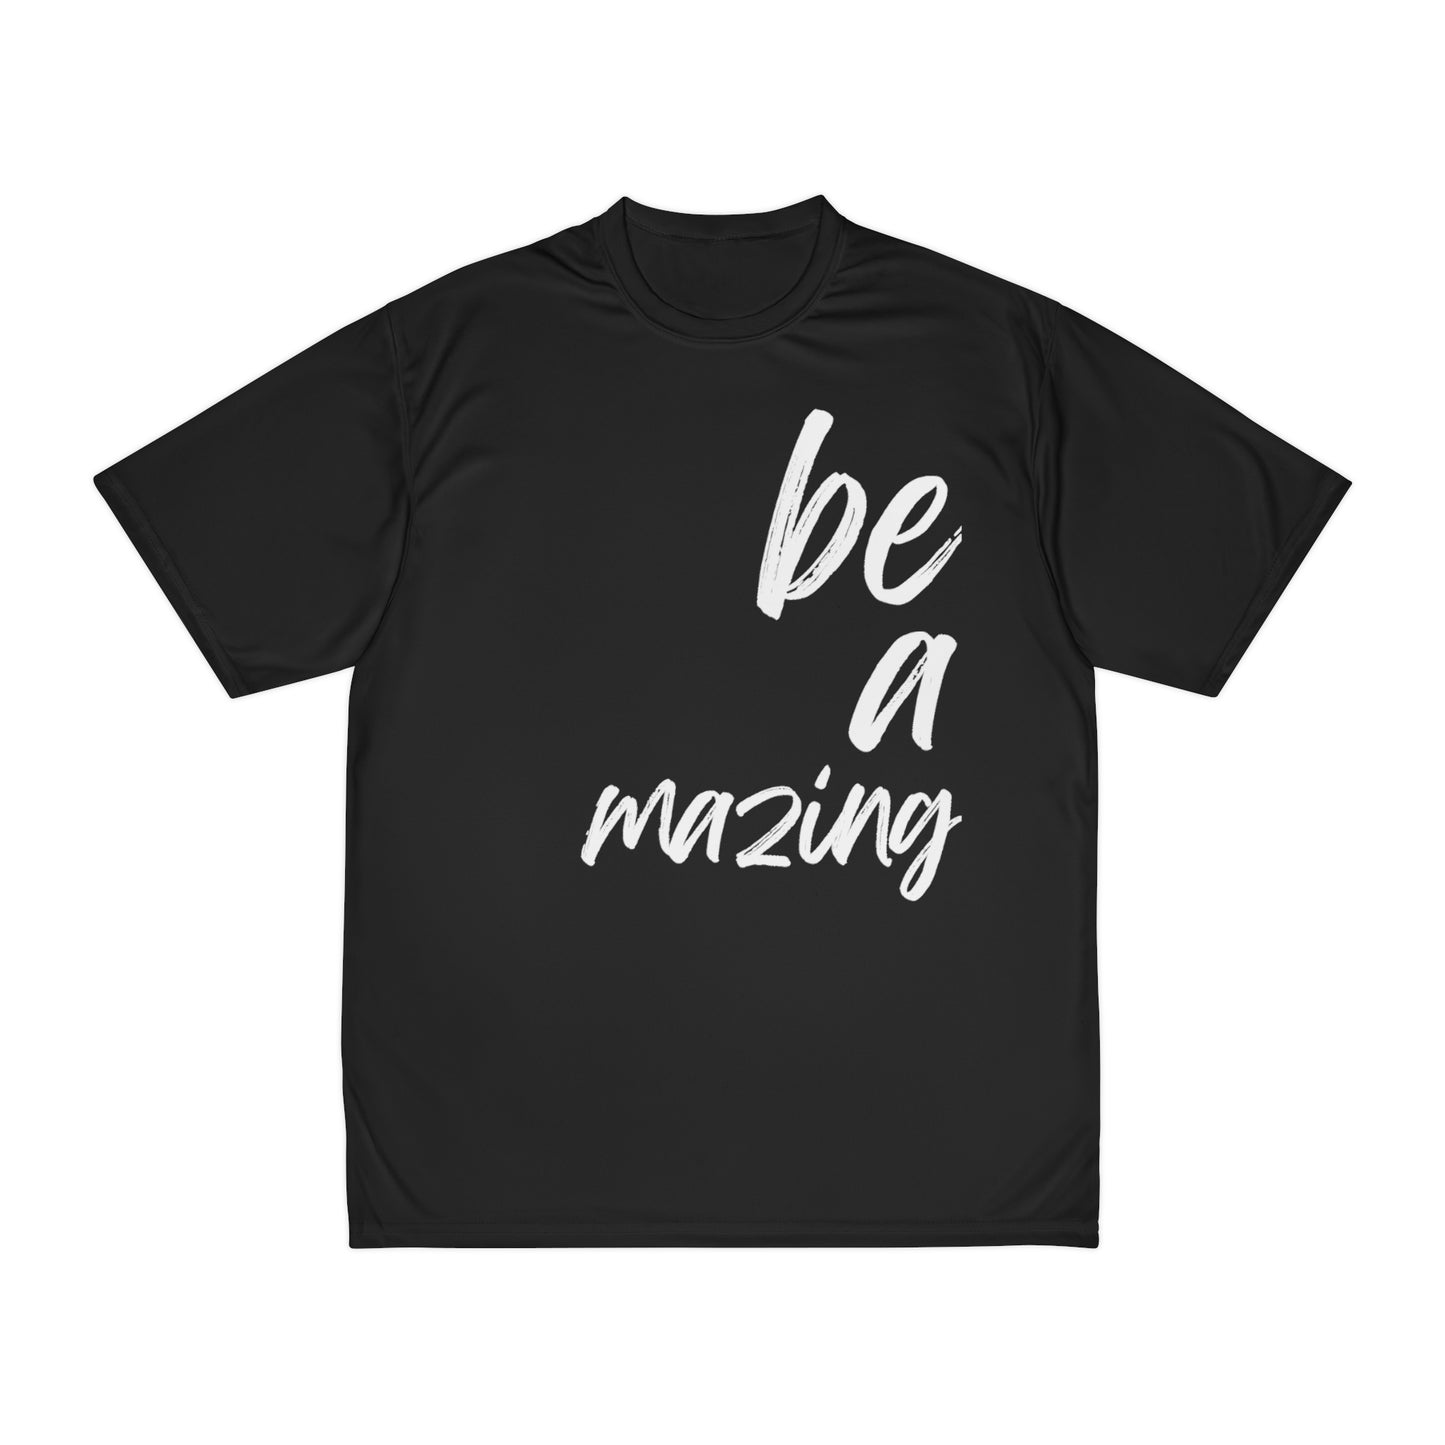 Be Amazing Men's T-Shirt, Mens shirt, gift for men, dads shirt, gift for dads